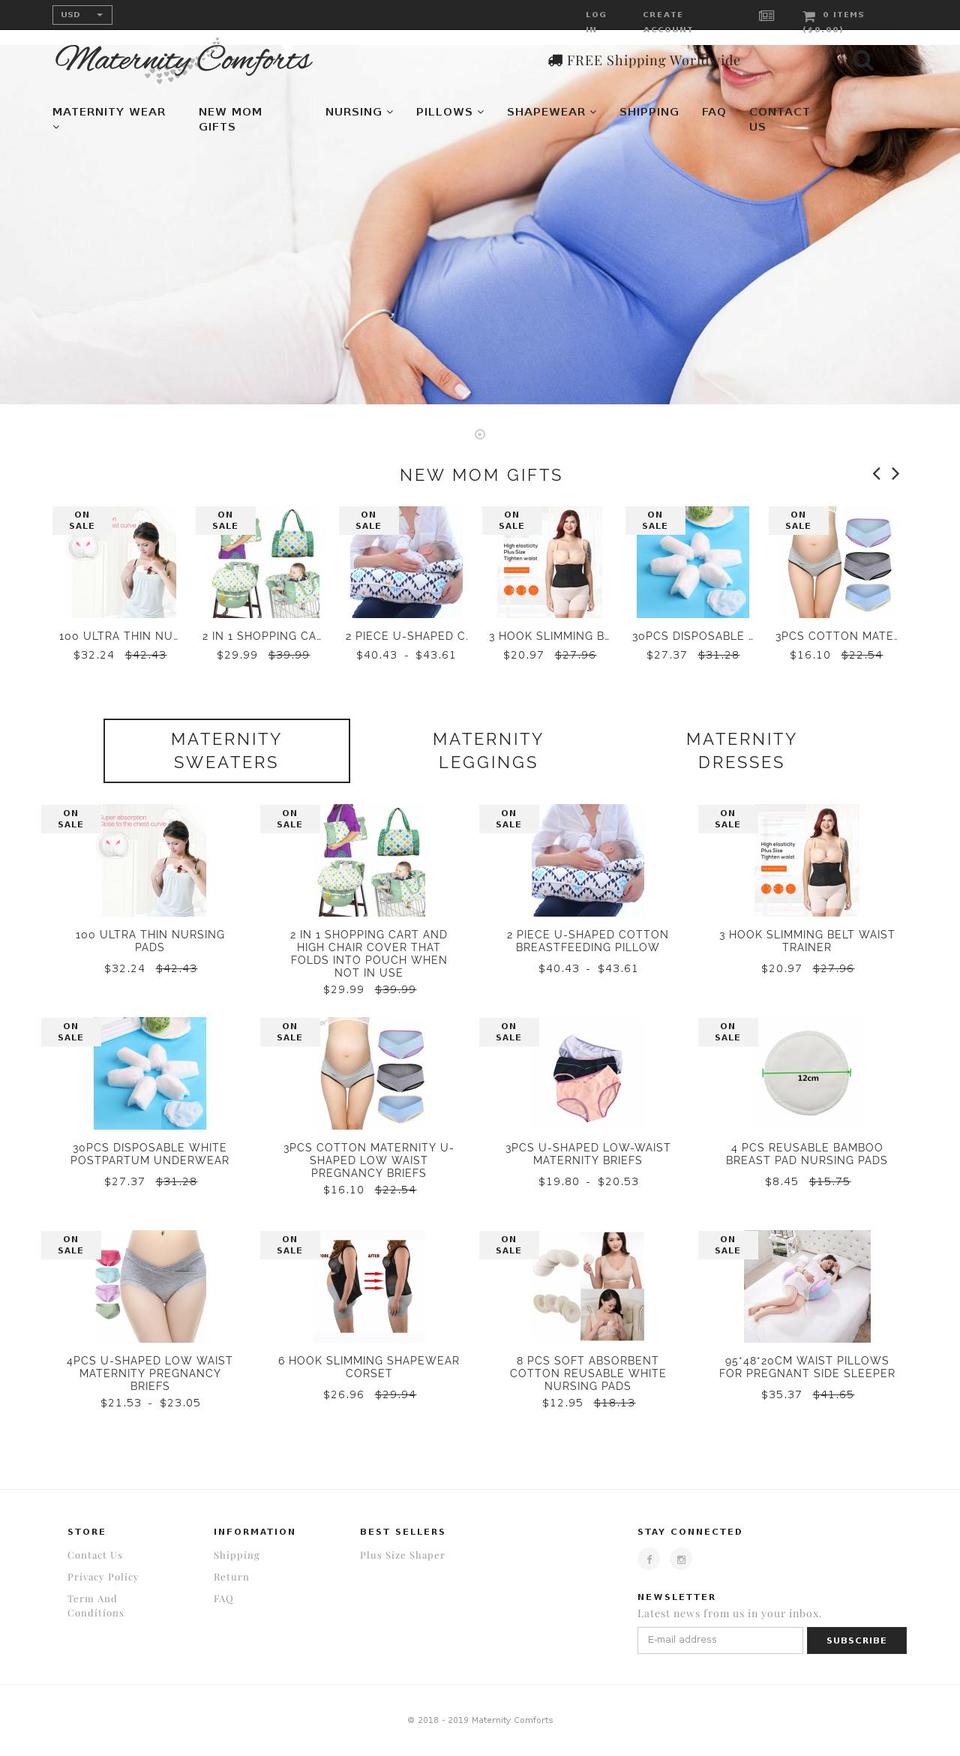 annabelle-v1-2 Shopify theme site example maternitycomforts.com